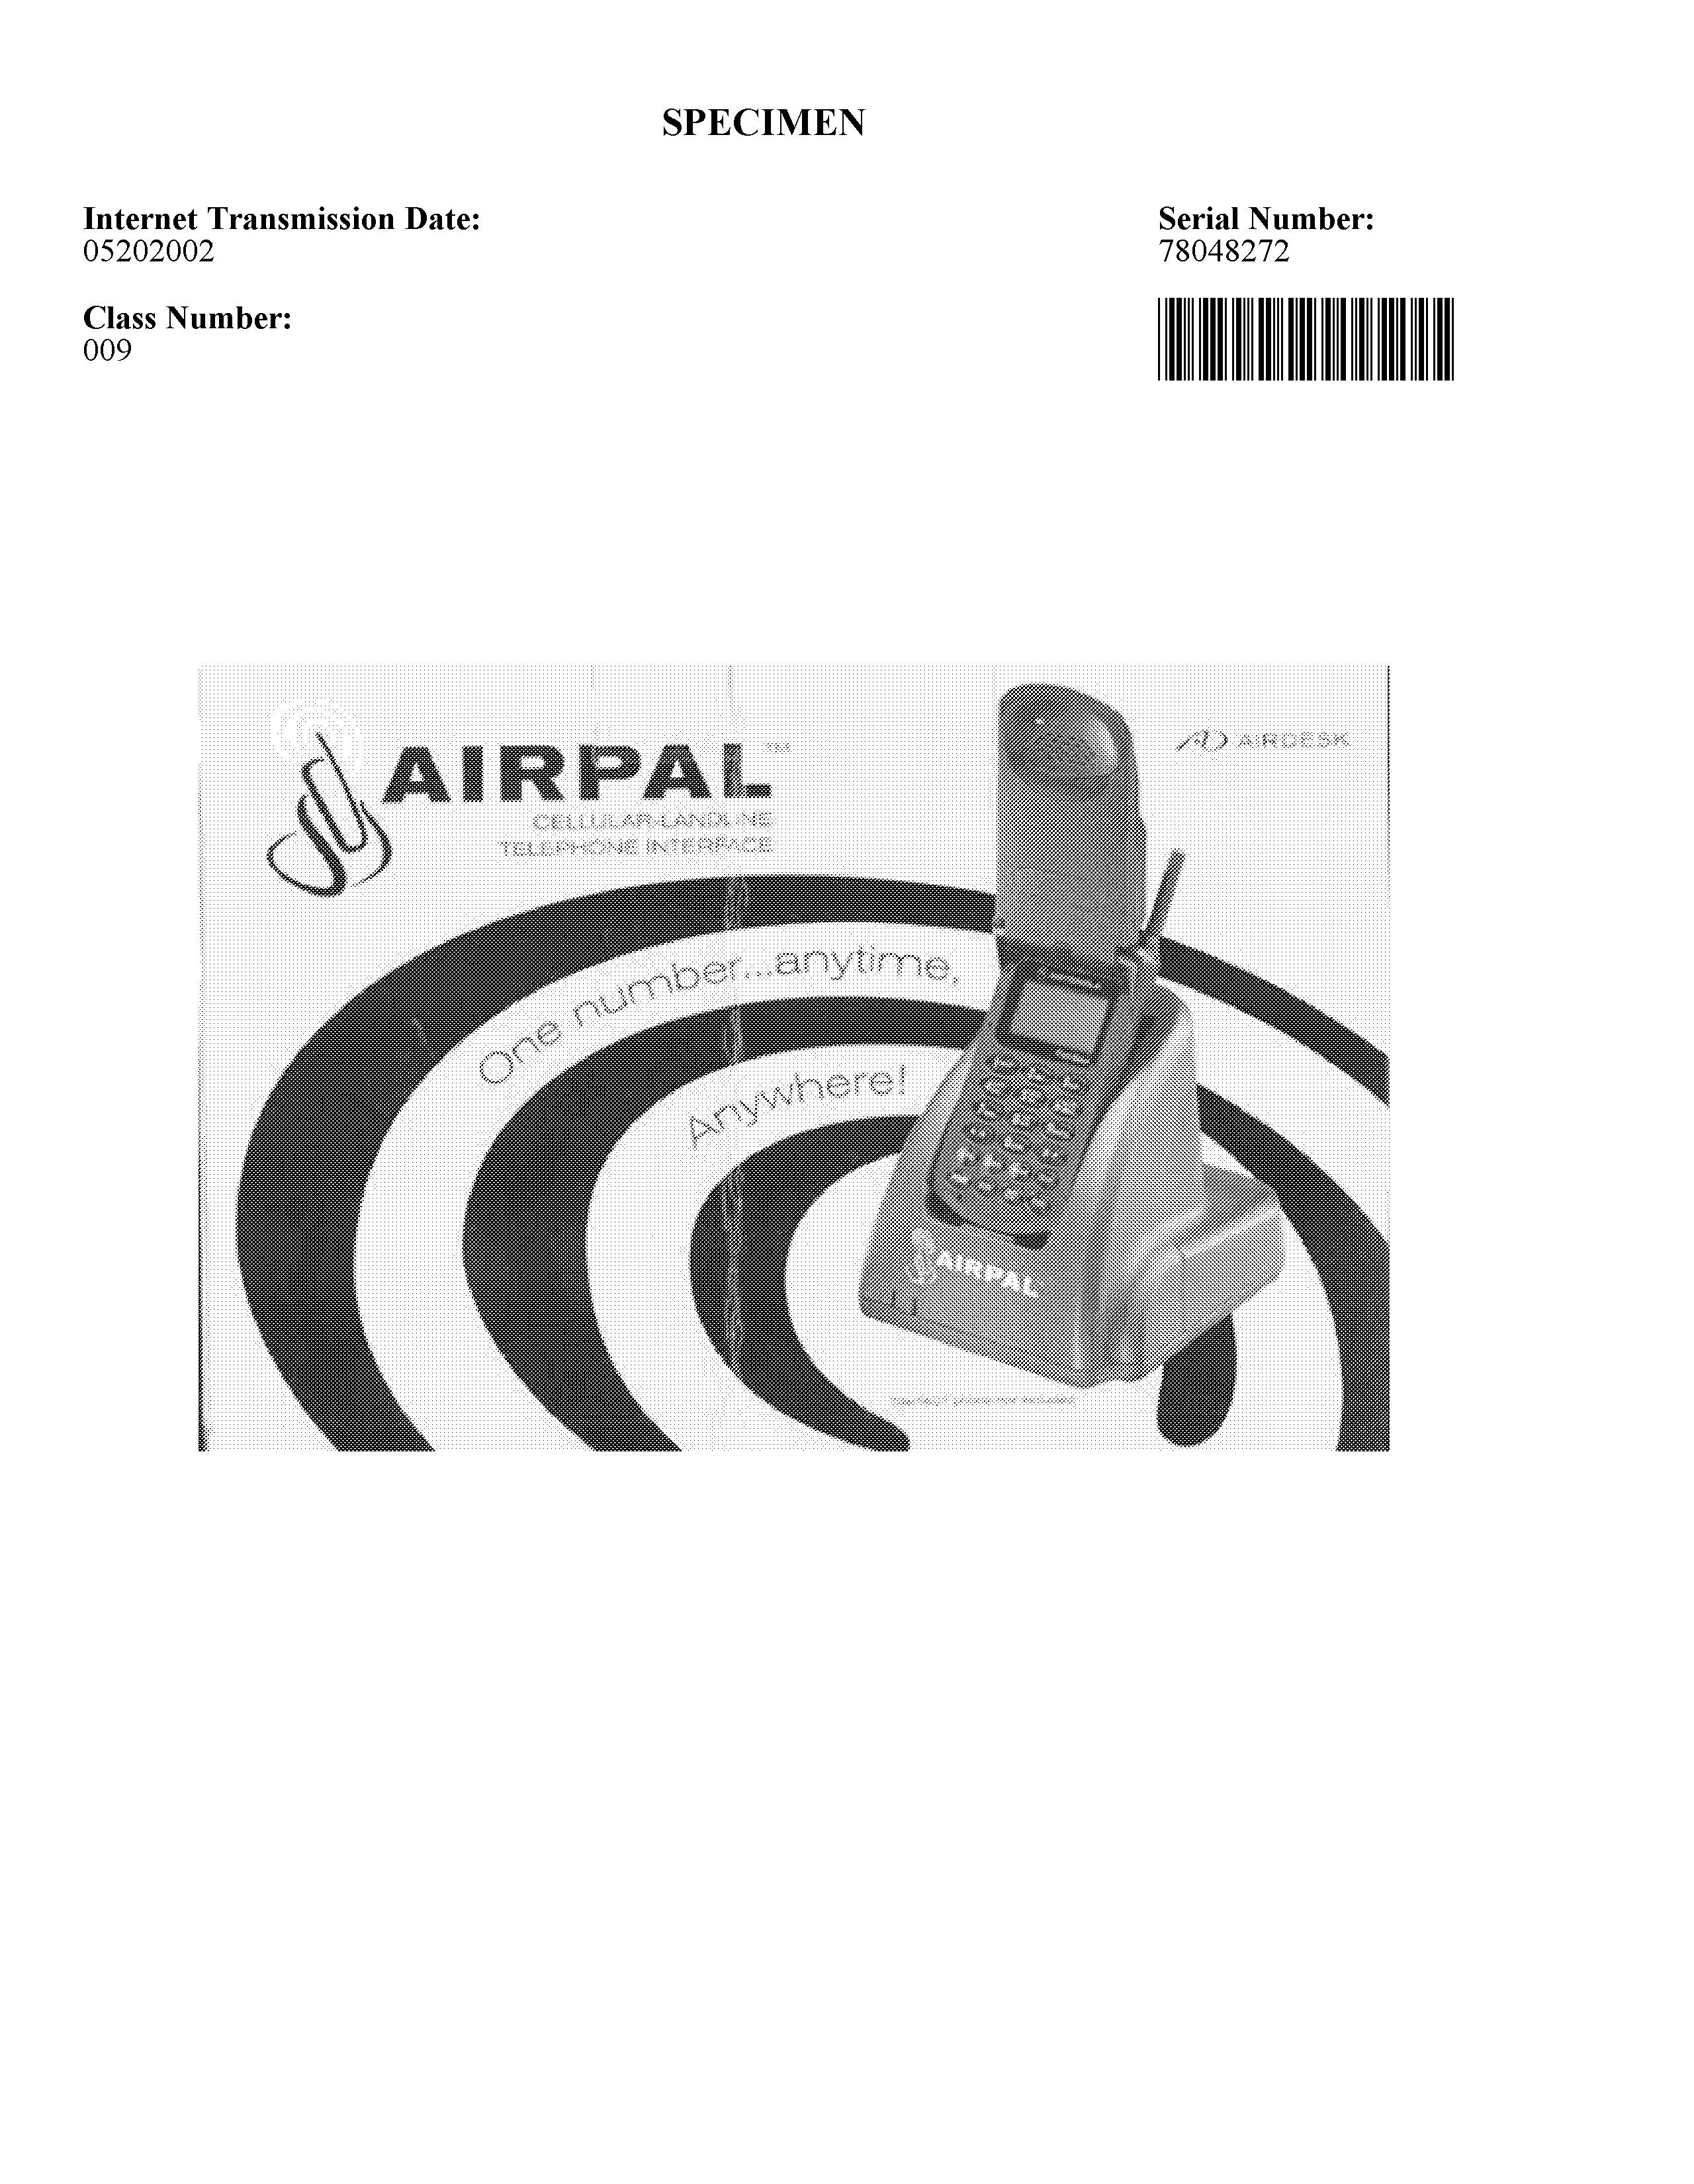 AIRPAL